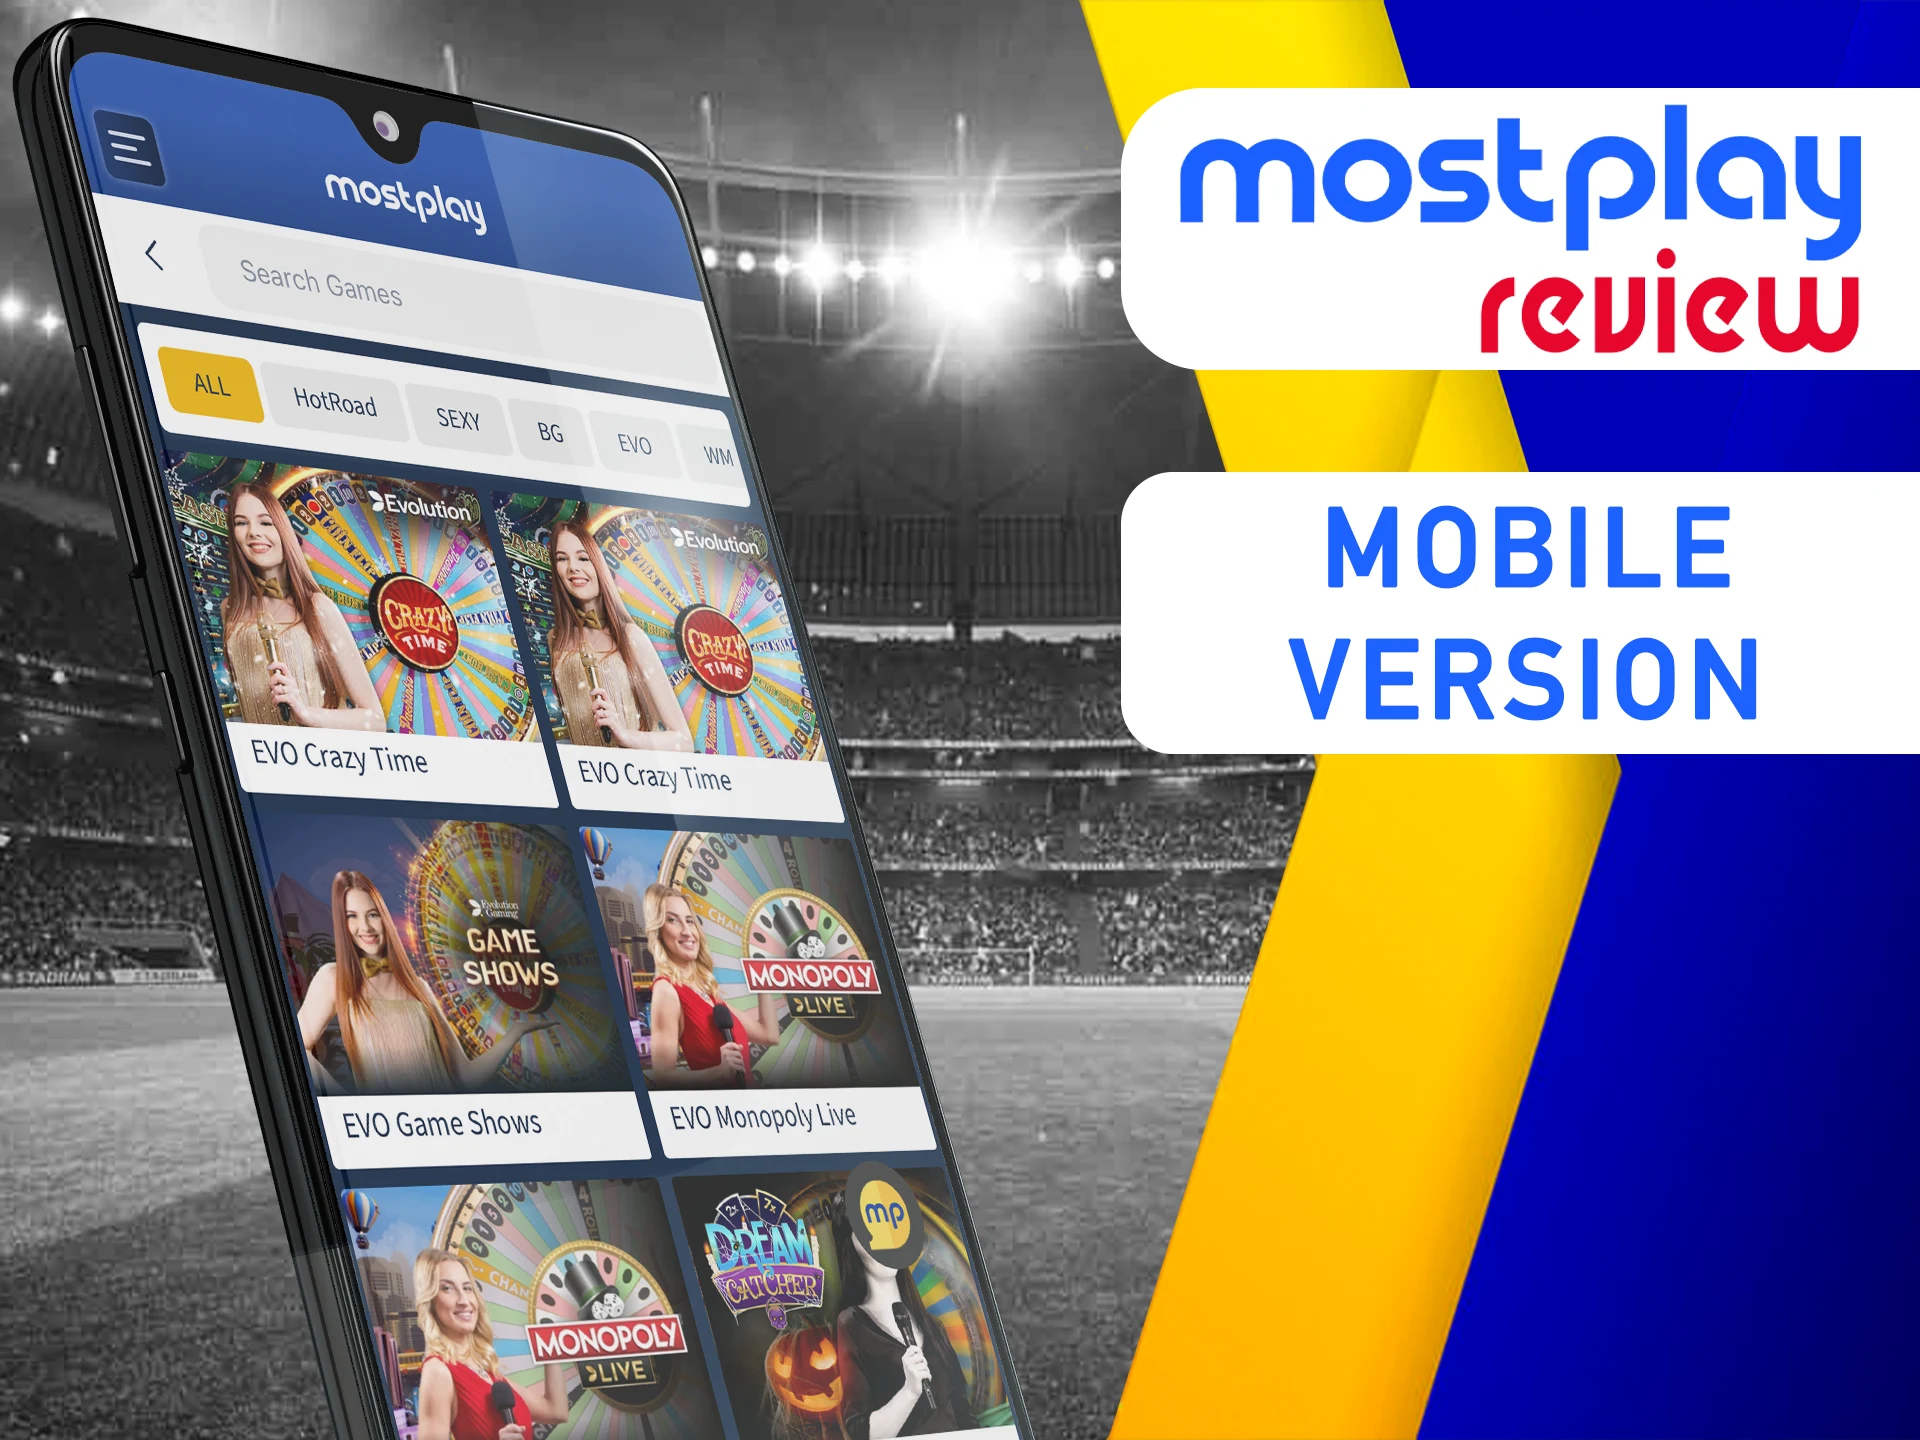 You can use the mobile version of the Mostplay website on any mobile device.